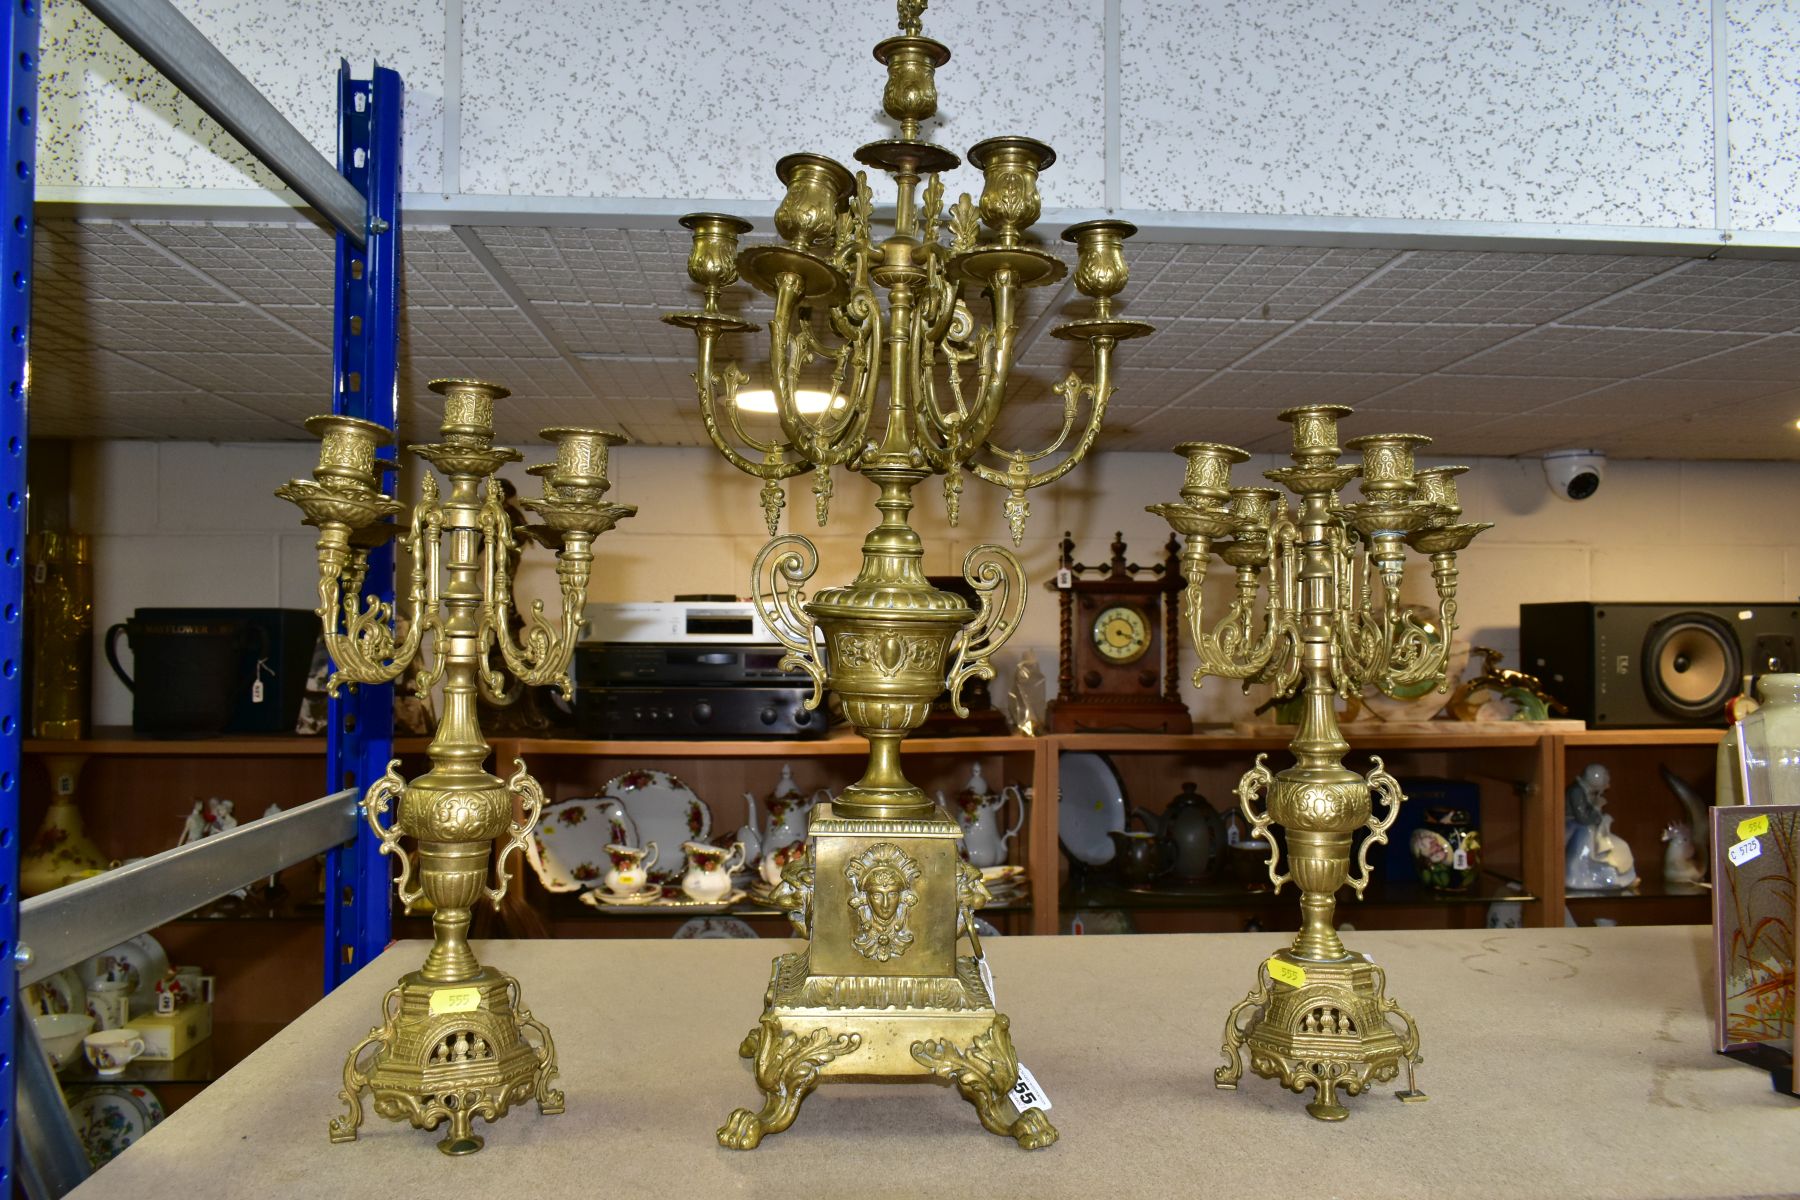 THREE BRASS CANDELABRA, one large candelabrum with five branches around a central sconce, the stem